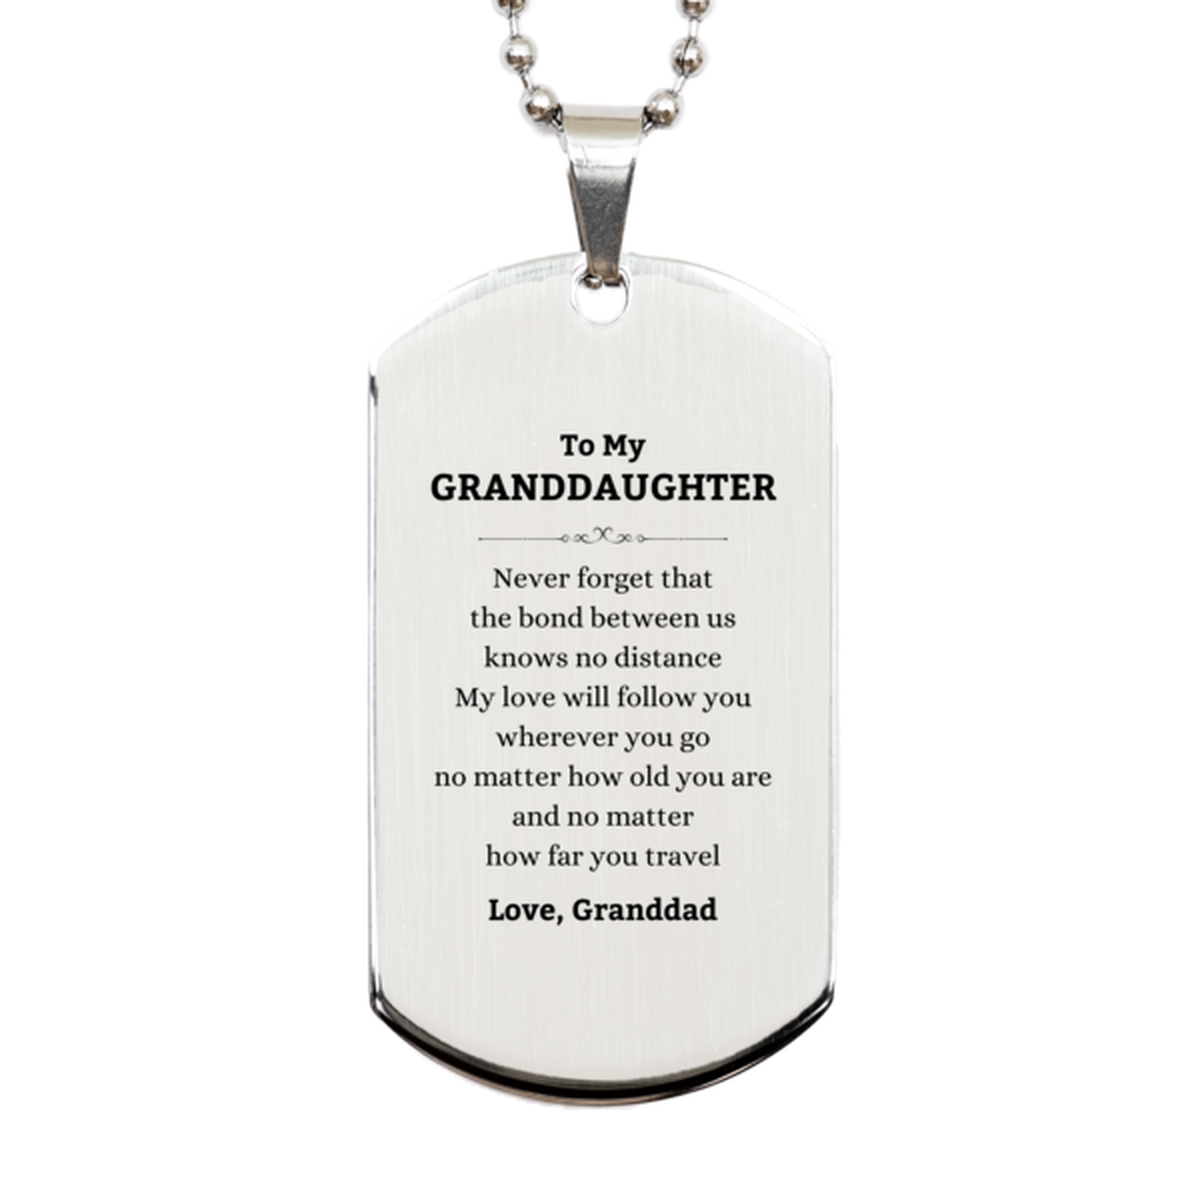 Granddaughter Birthday Gifts from Granddad, Adjustable Silver Dog Tag for Granddaughter Christmas Graduation Unique Gifts Granddaughter Never forget that the bond between us knows no distance. Love, Granddad